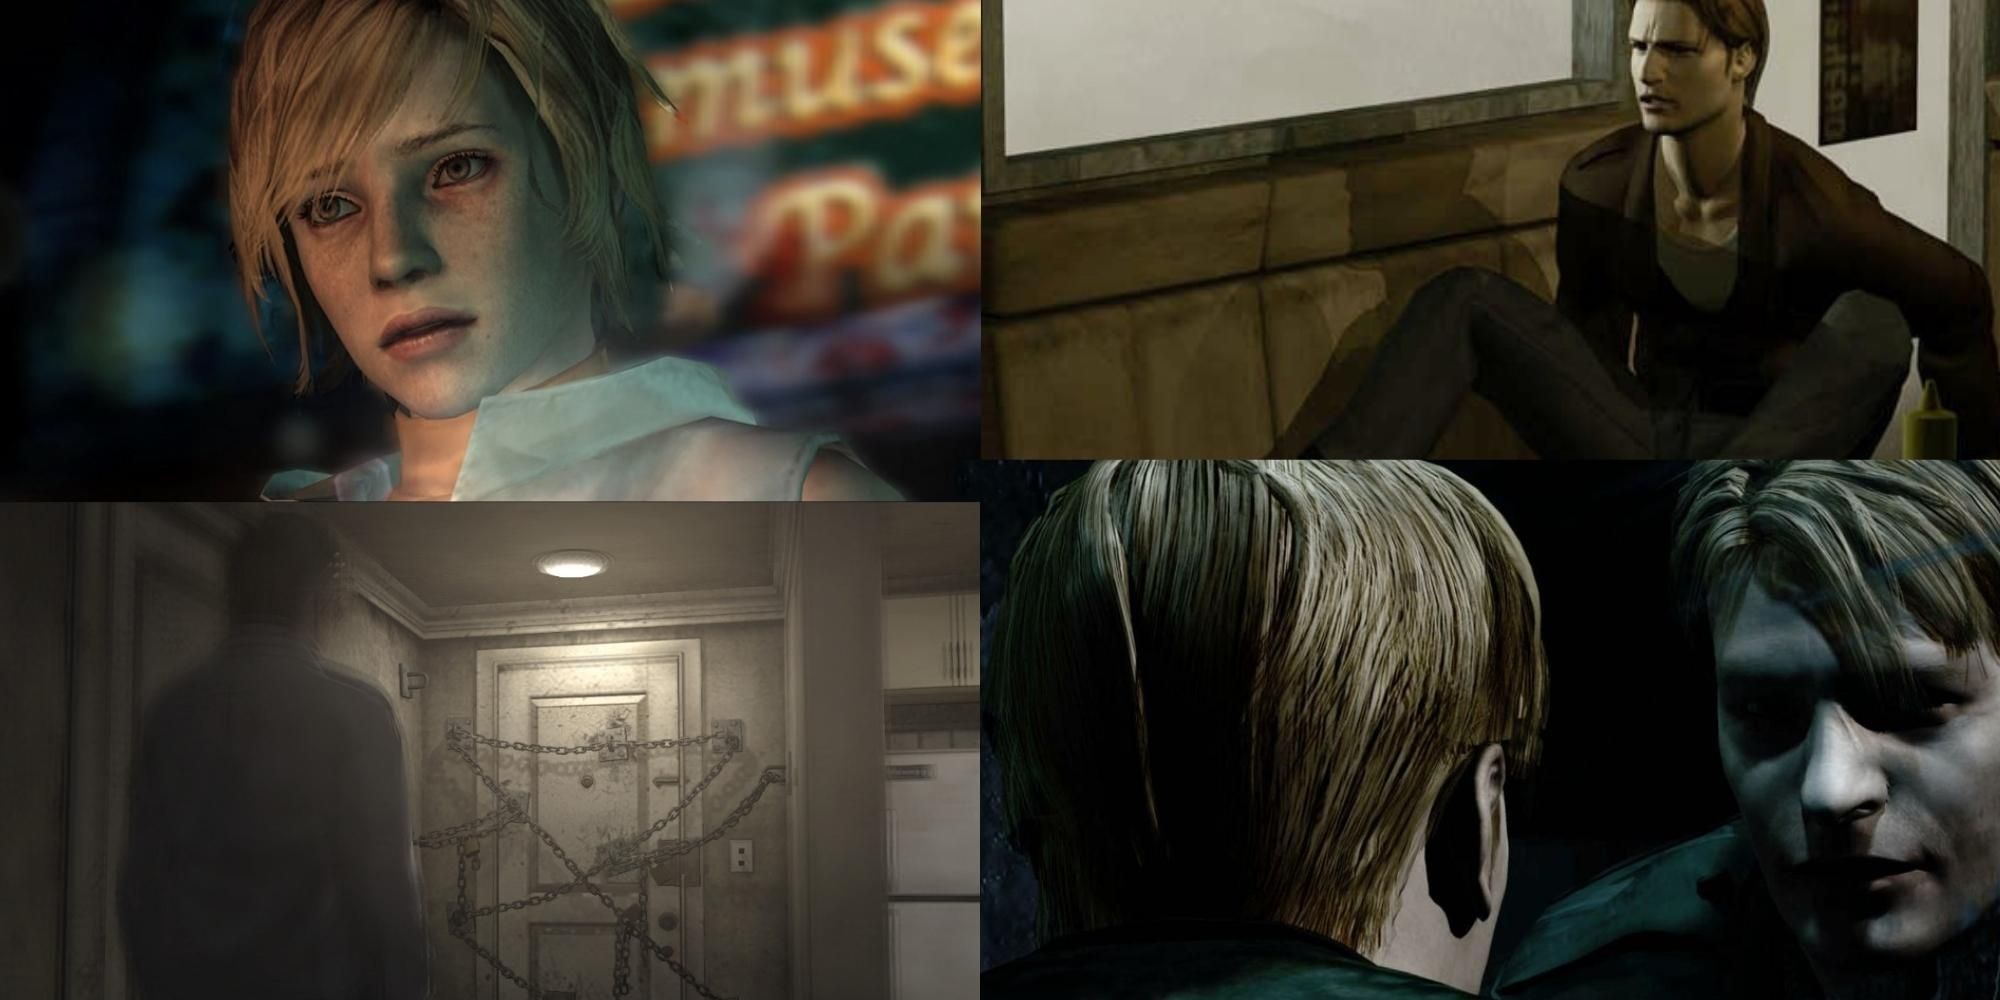 Main characters from the video games Silent Hill 1, 2, 3, and 4